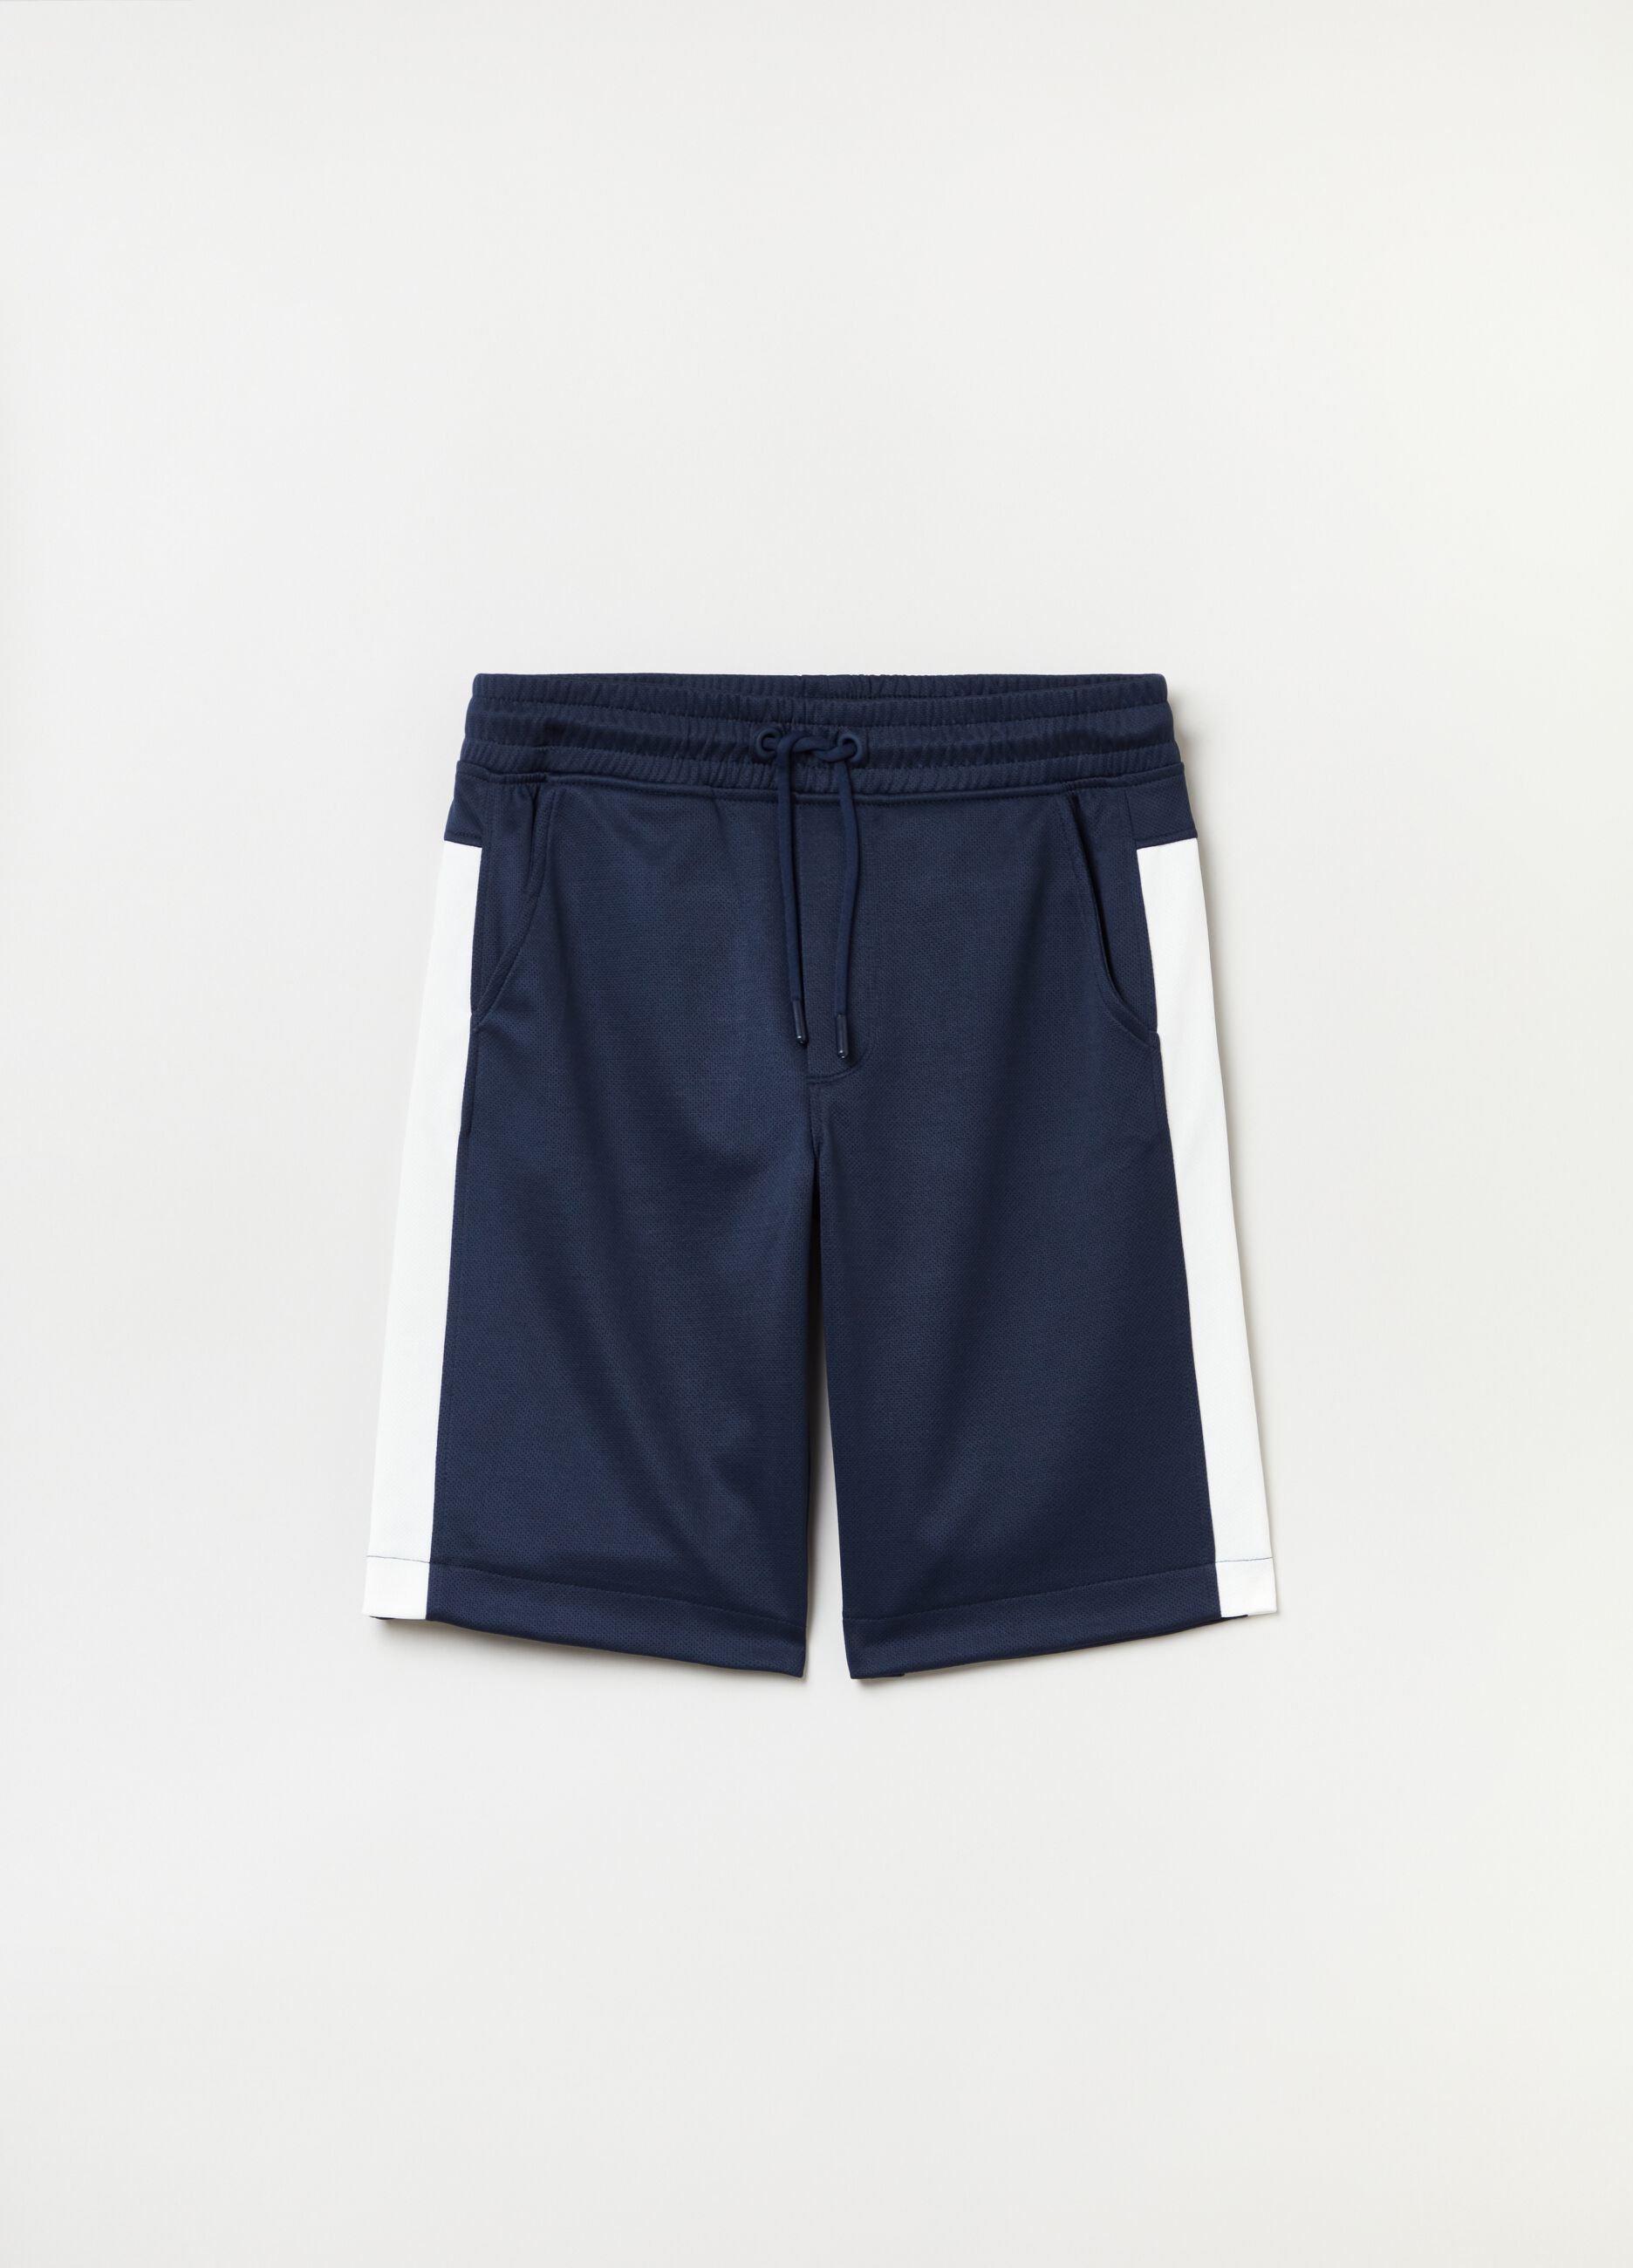 Bermuda shorts with contrasting bands